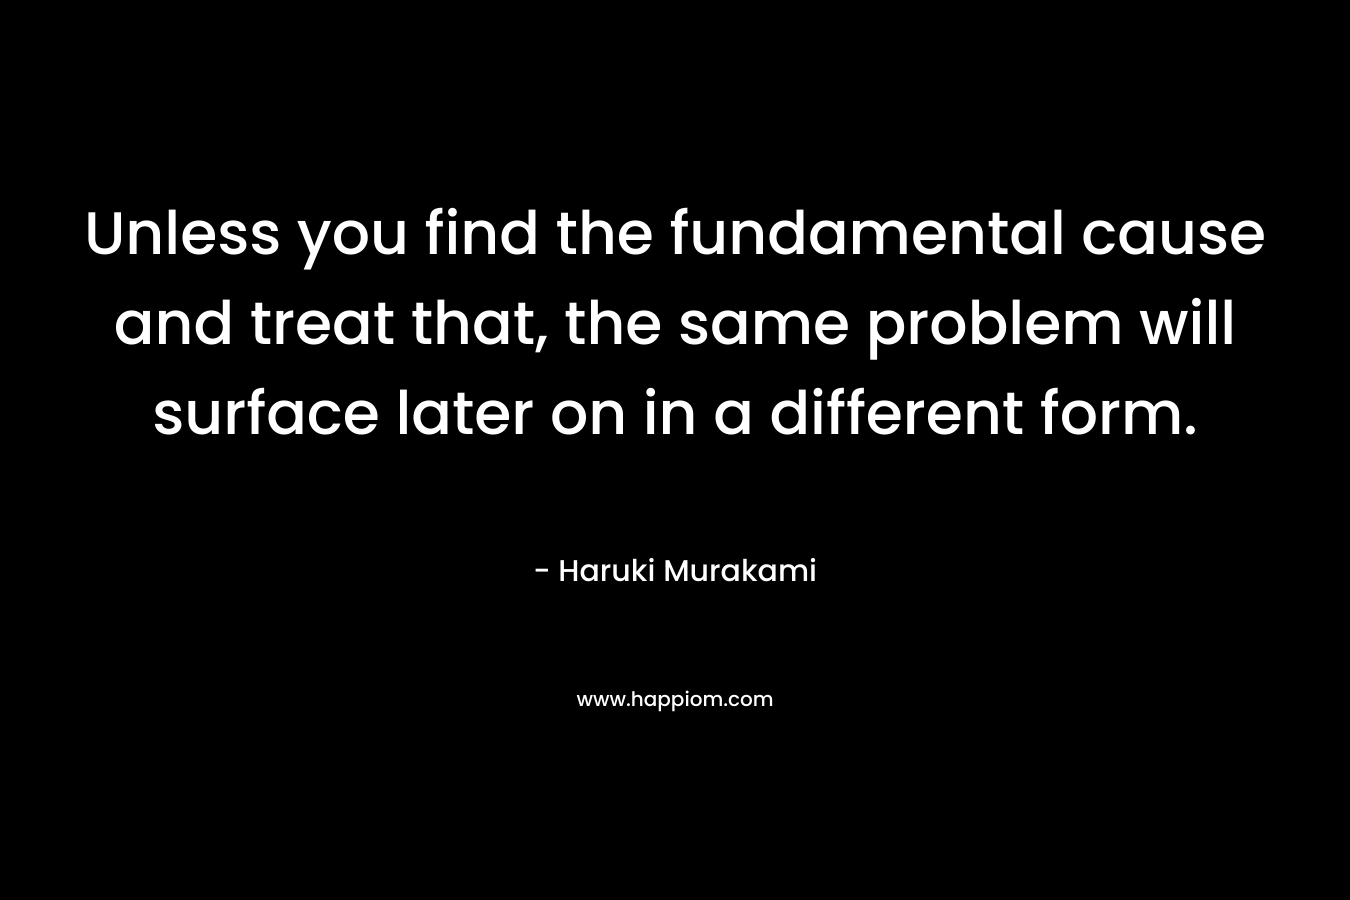 Unless you find the fundamental cause and treat that, the same problem will surface later on in a different form. – Haruki Murakami